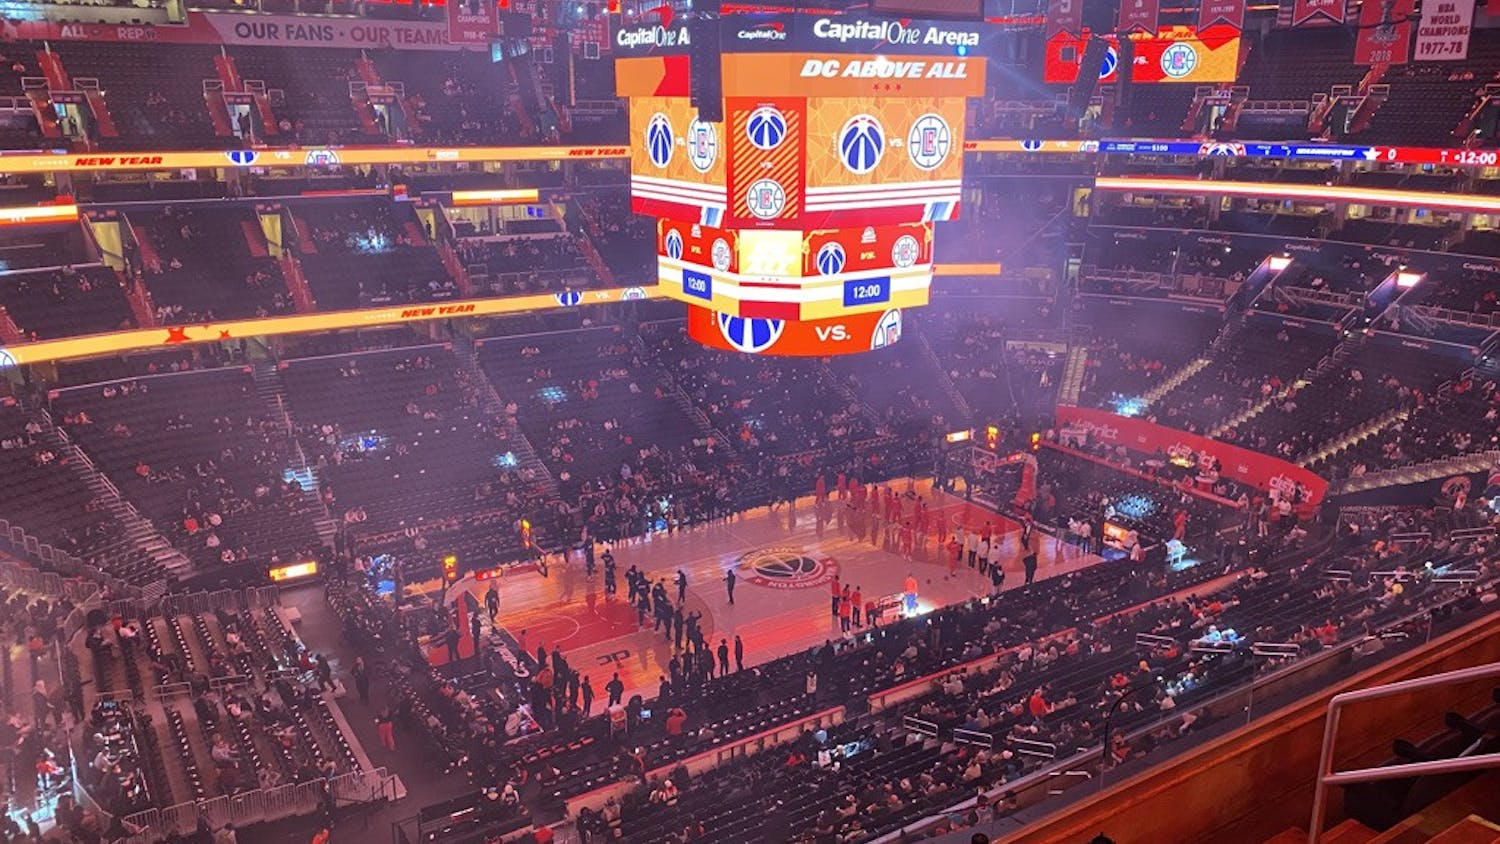 wizards game arena